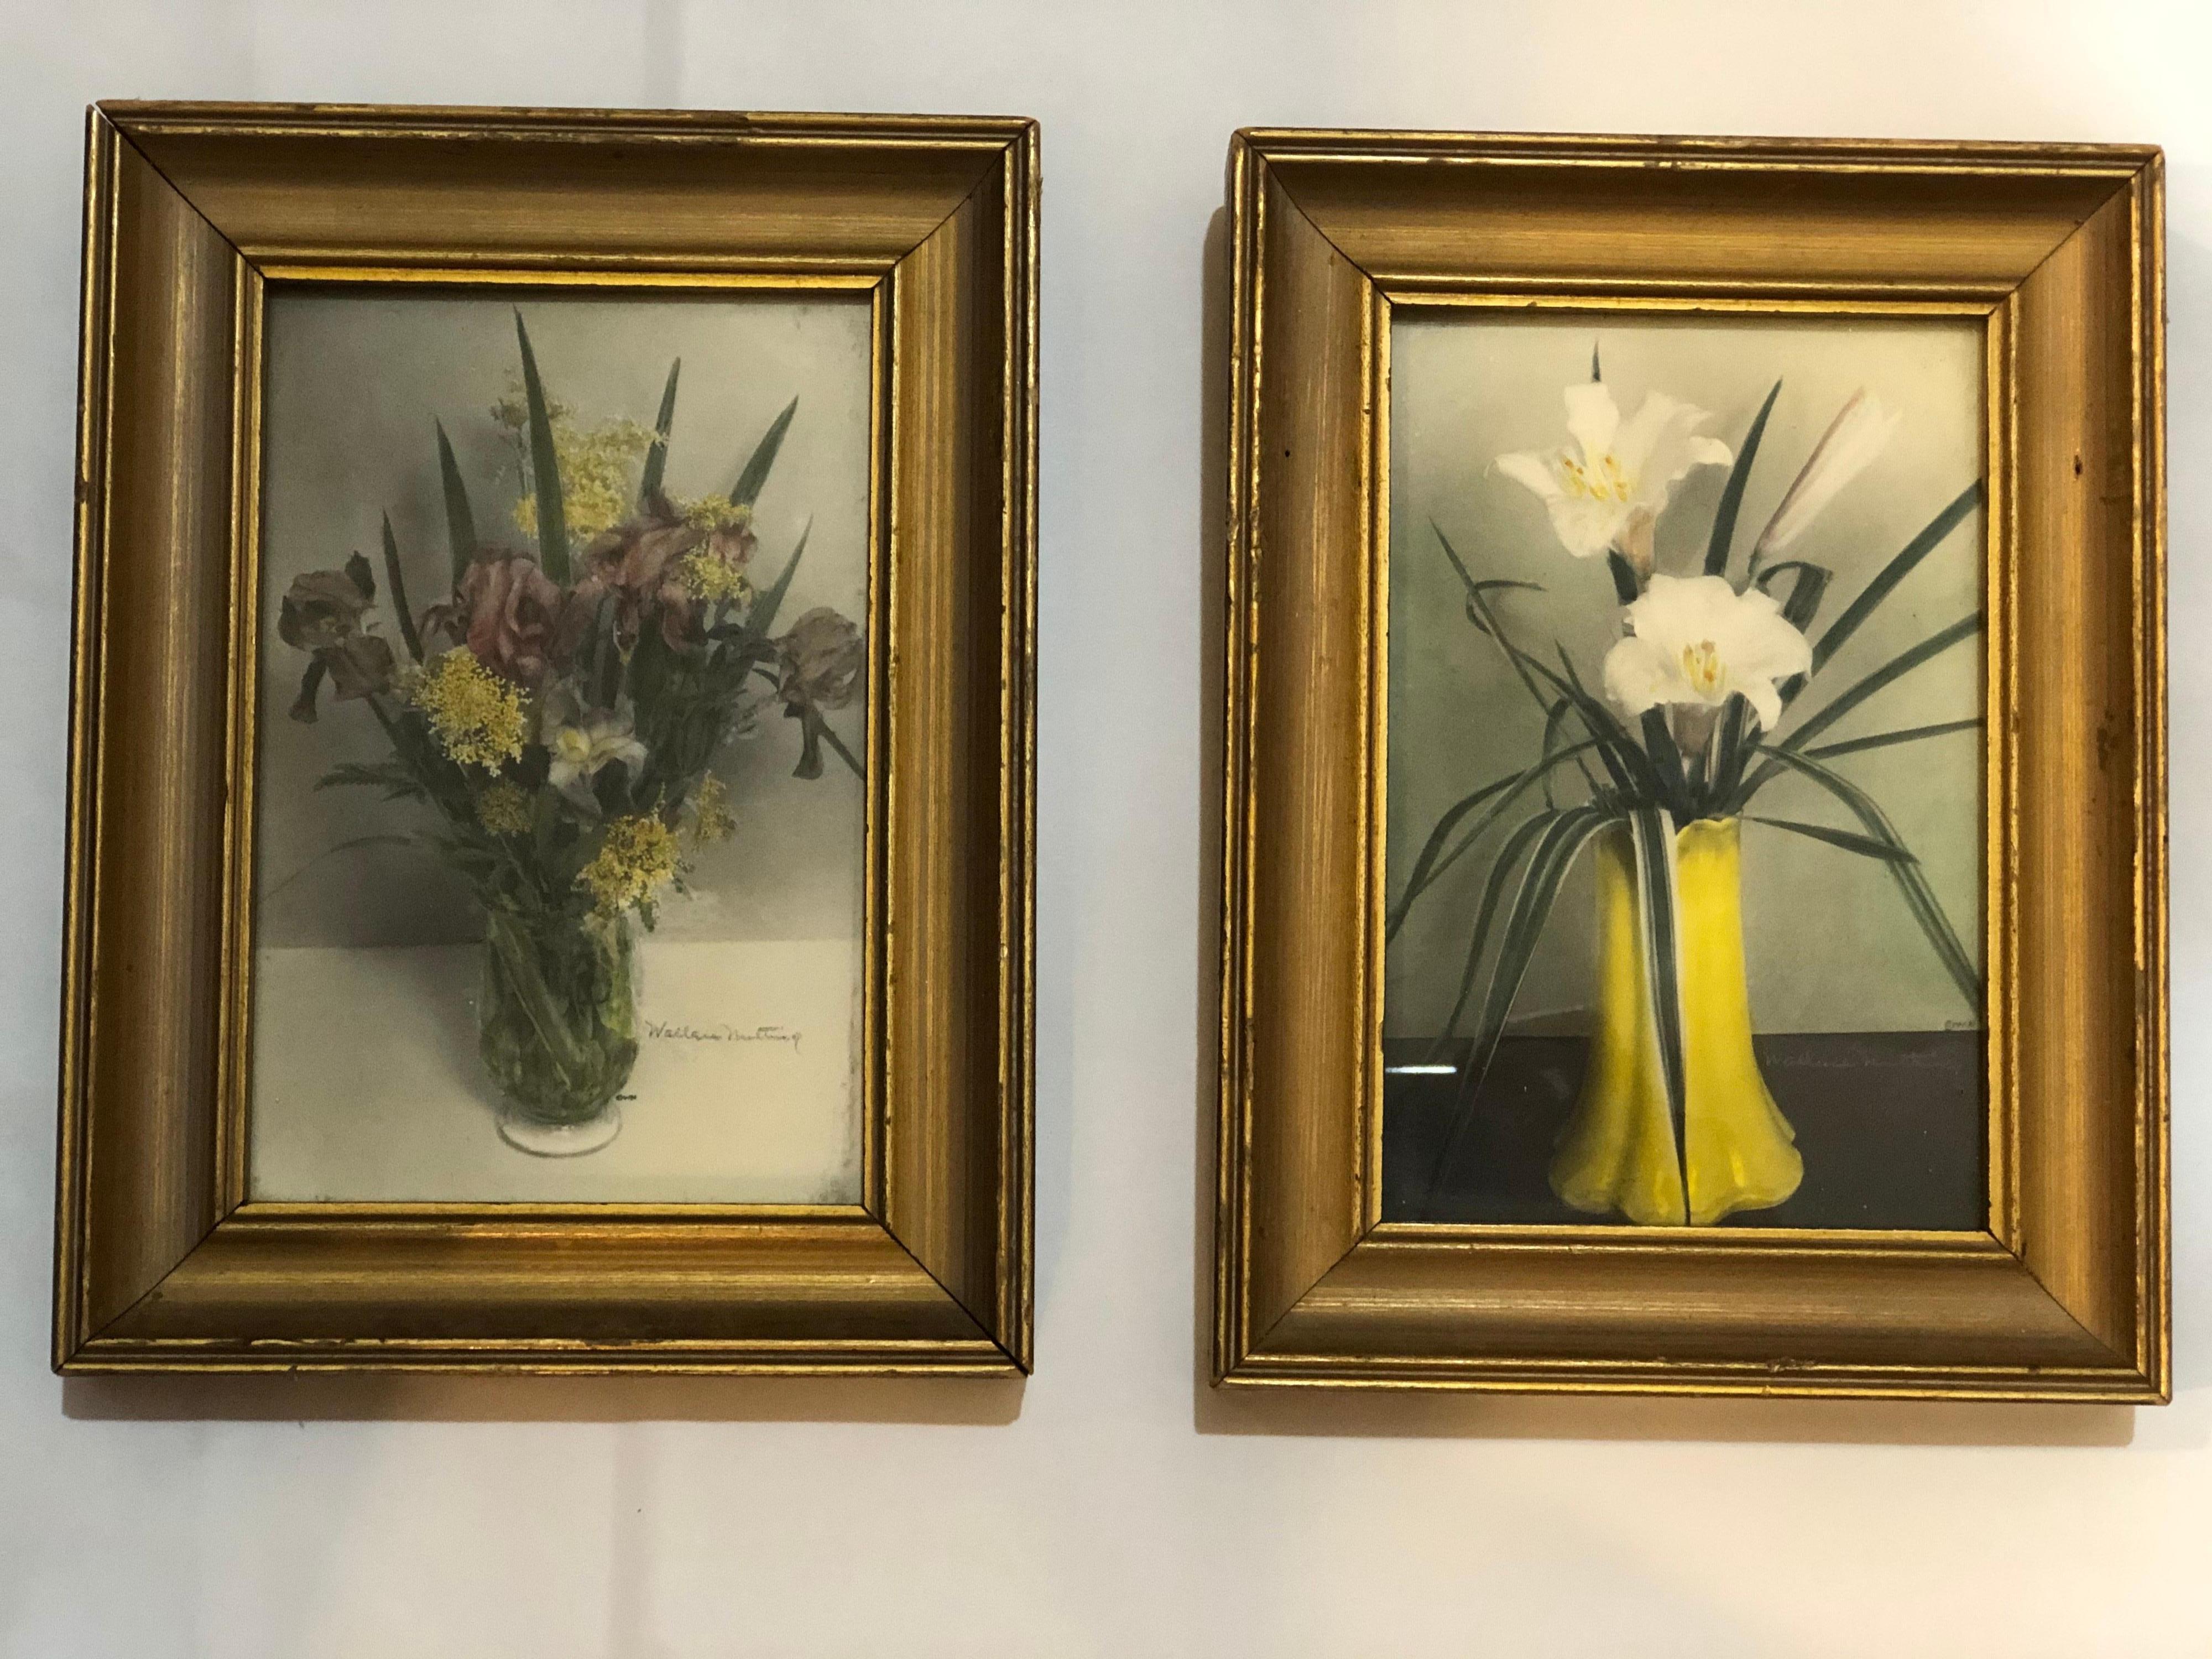 Pair of signed Wallace Nutting hand colored floral photographs. These can parcel ship for $45
Wallace Nutting (1861-1941)

In 1904 Wallace Nutting opened the Wallace Nutting Art Prints Studio on East 23rd Street in New York. After a year he moved